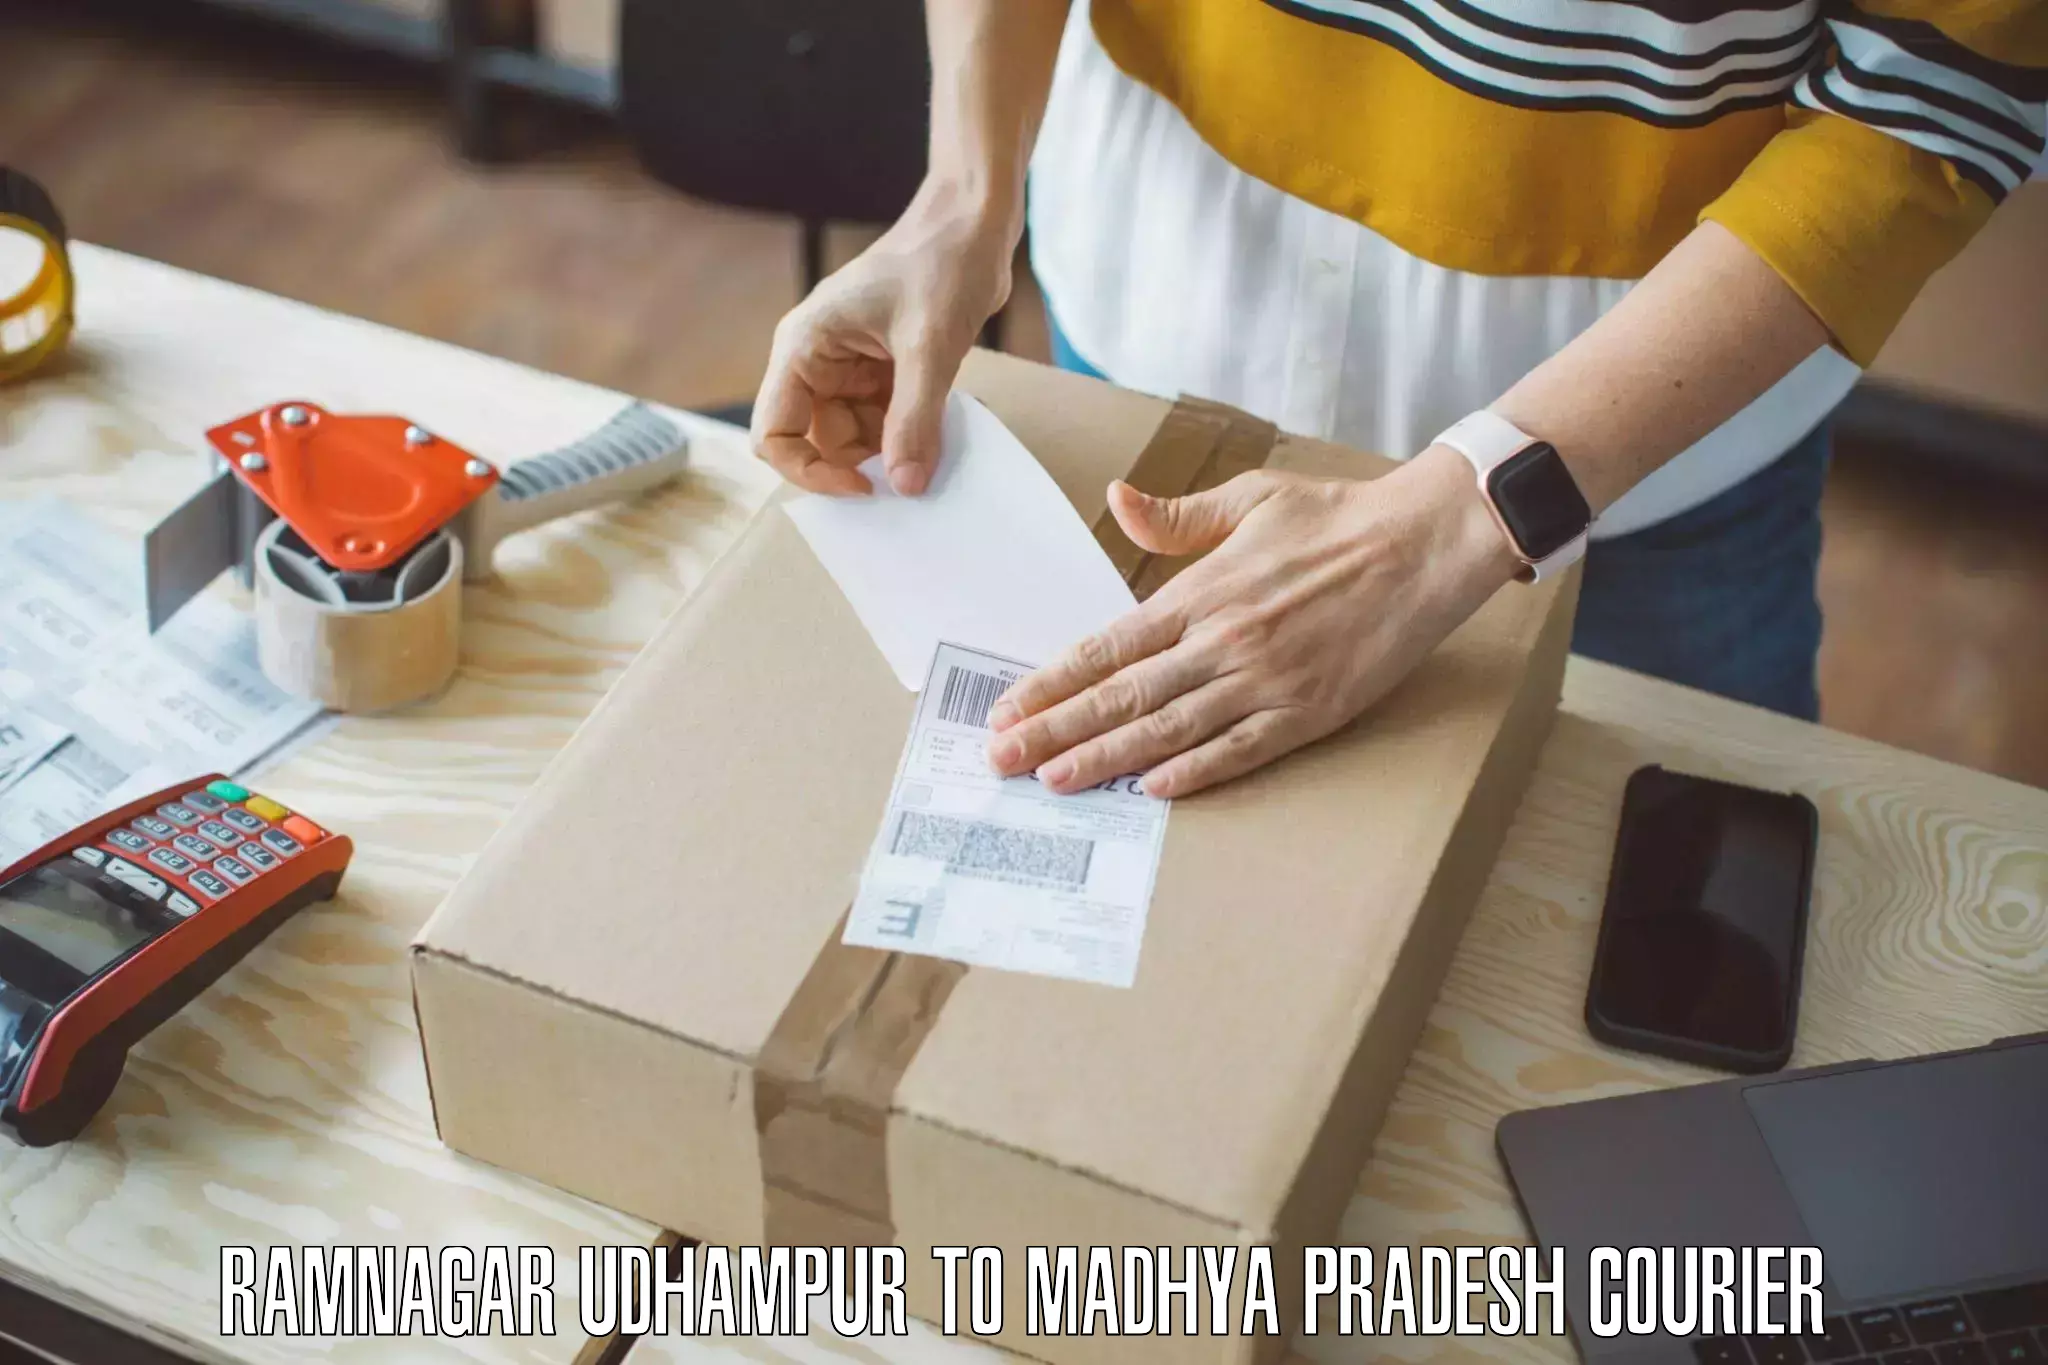 Residential moving experts Ramnagar Udhampur to IIIT Bhopal